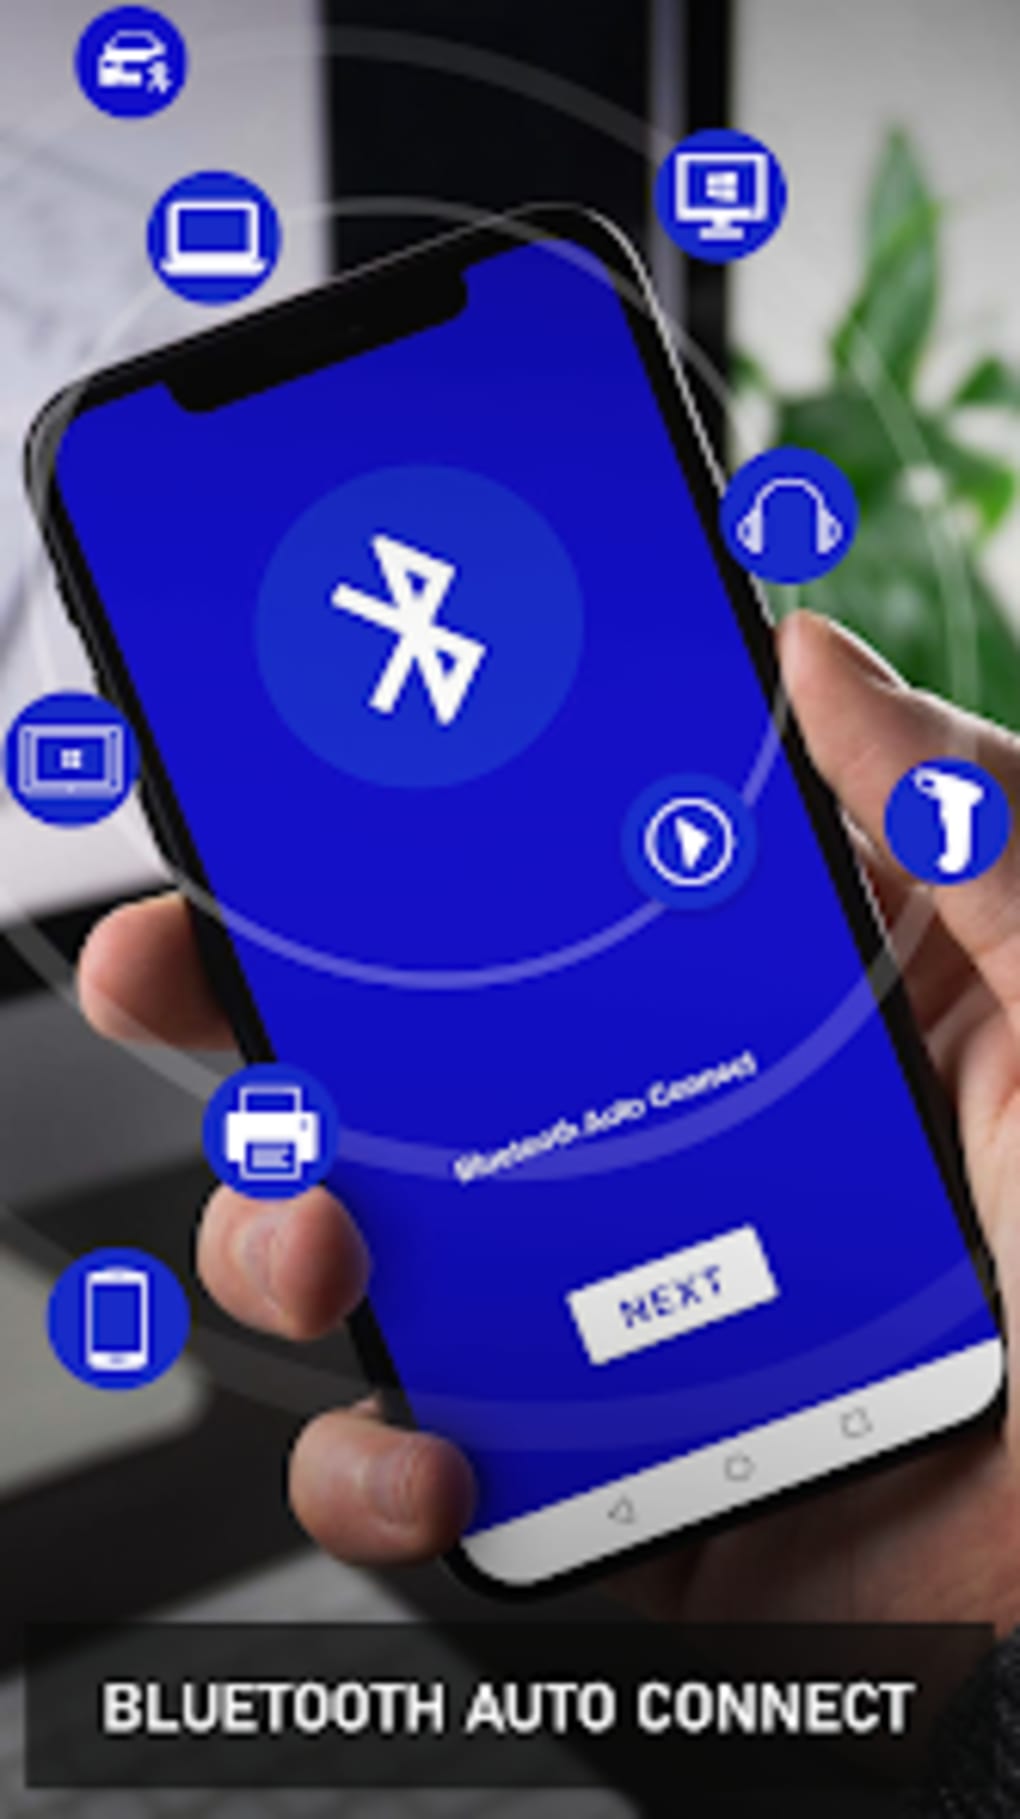 Bluetooth Auto Connect: Pair لنظام Android - تنزيل